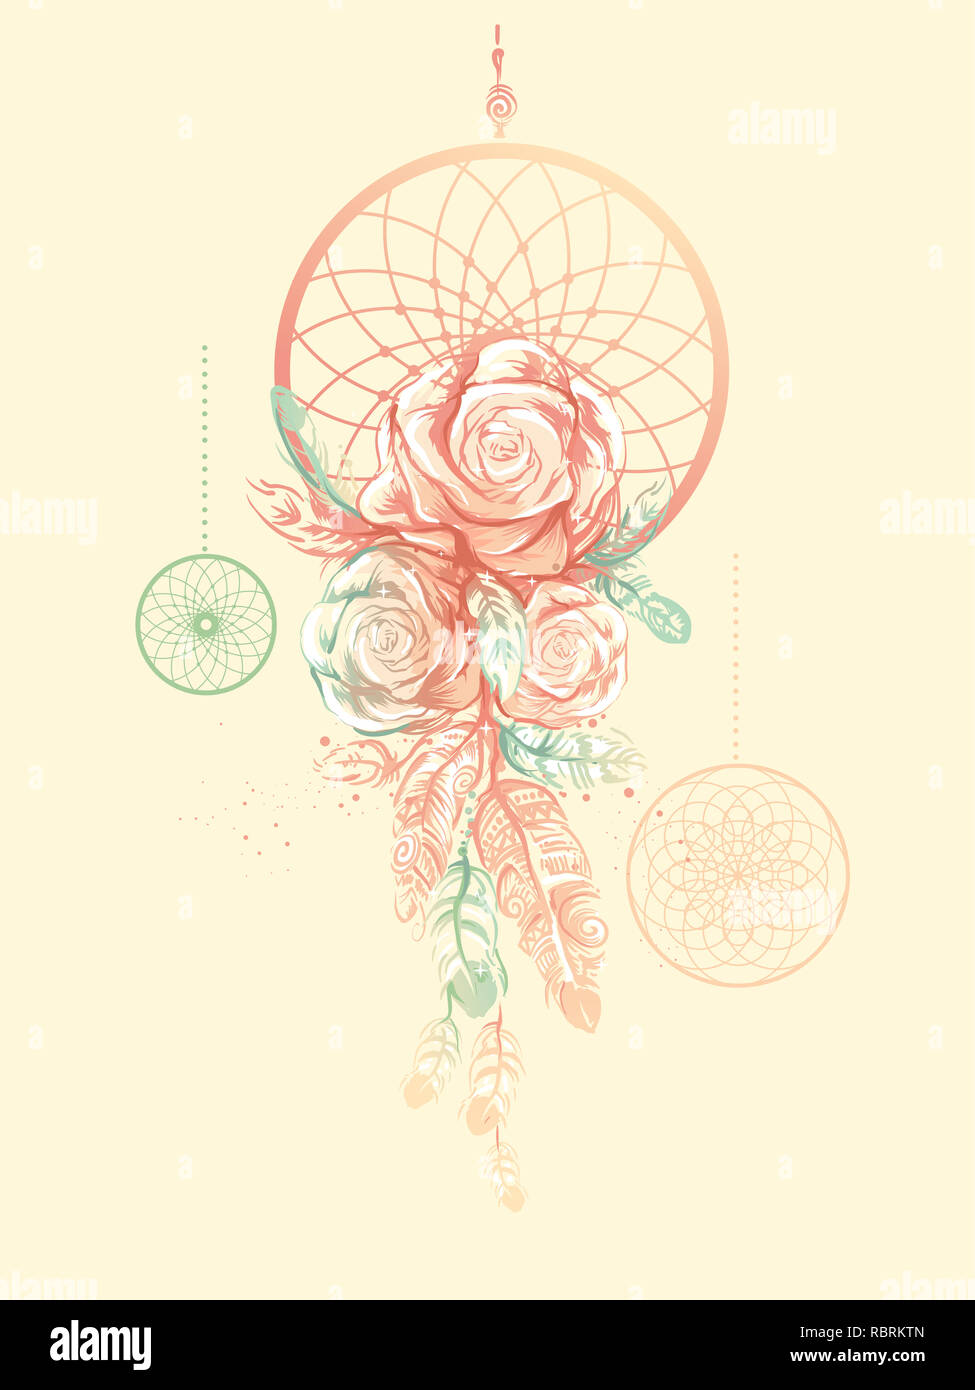 Illustration of a Boho Dream Catcher with Roses and Feathers Stock Photo -  Alamy